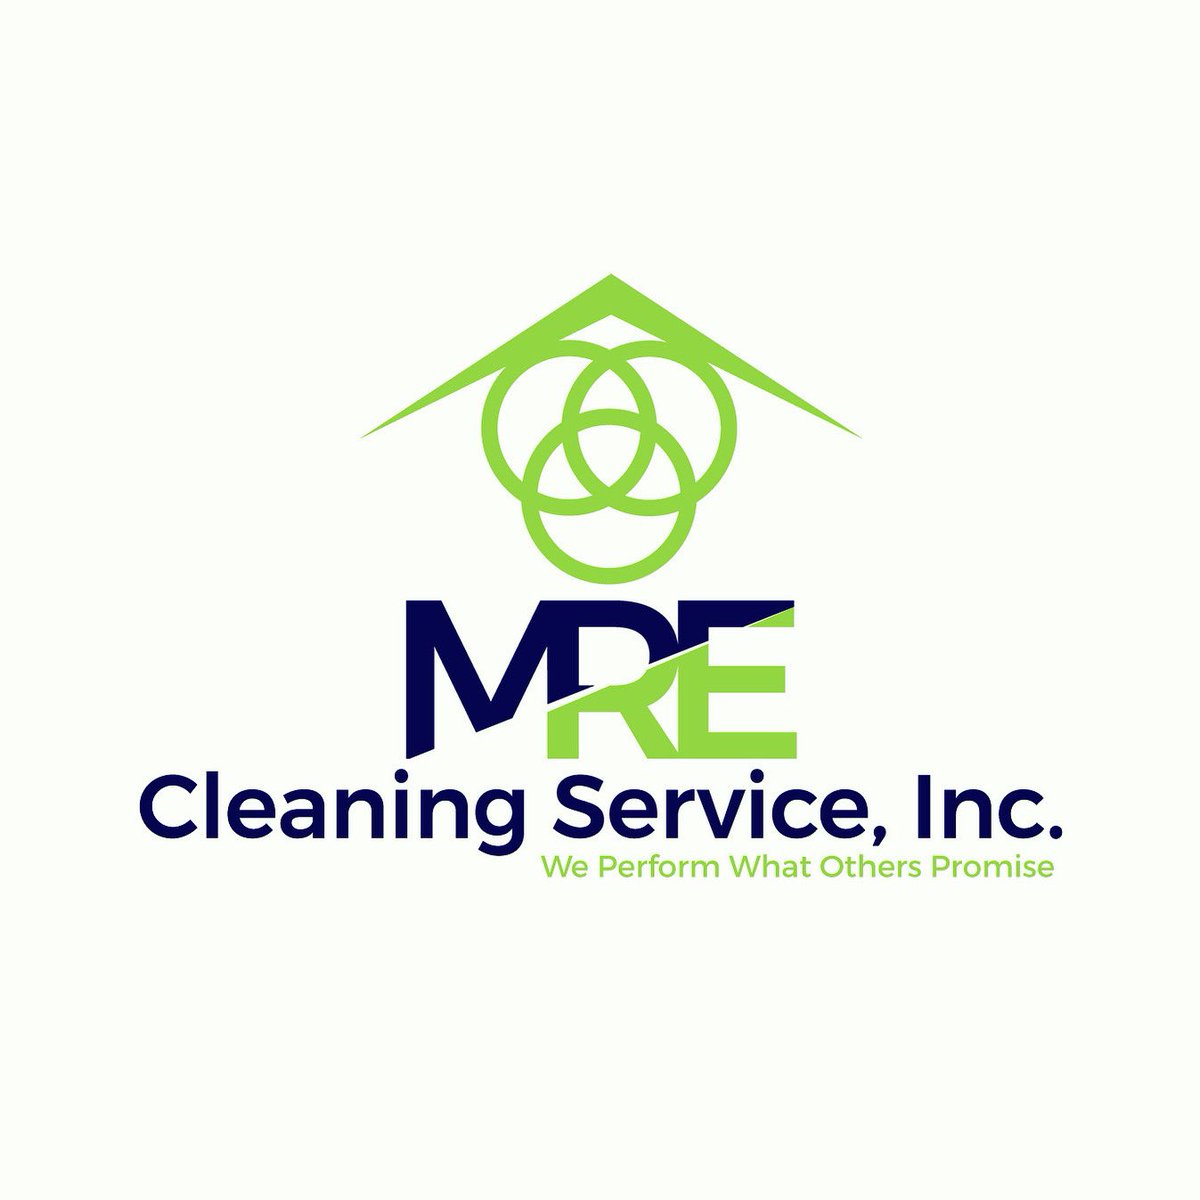 Ready to elevate your workspace? Look no further! M.R.E. Cleaning Service, Inc. specializes in top-notch Commercial Cleaning. ✨ From offices to retail spaces, we've got you covered. Book now for a sparkling clean environment! 🧹 #CommercialCleaning #BookNow #MRECleaningService